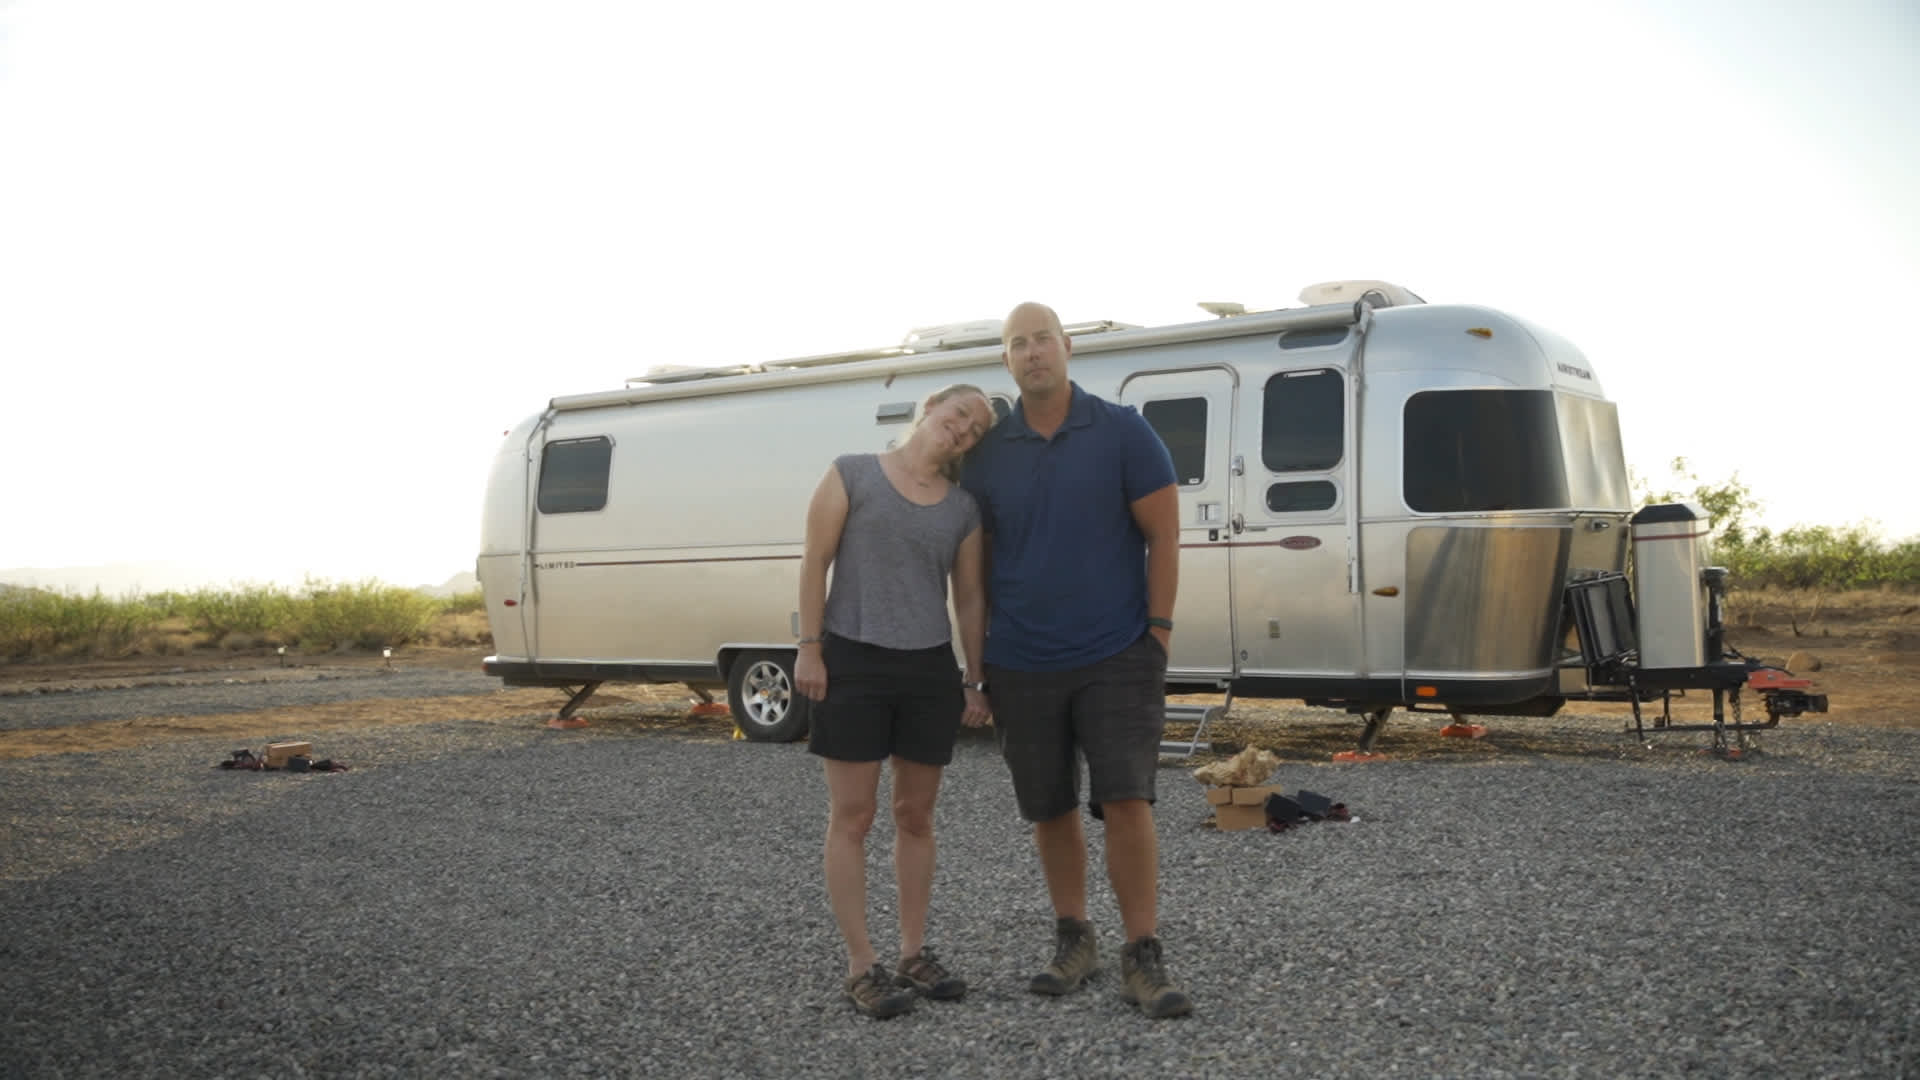 Steve and Courtney bought their 2005 Airstream for $42,000 cash and have used it to travel the country.